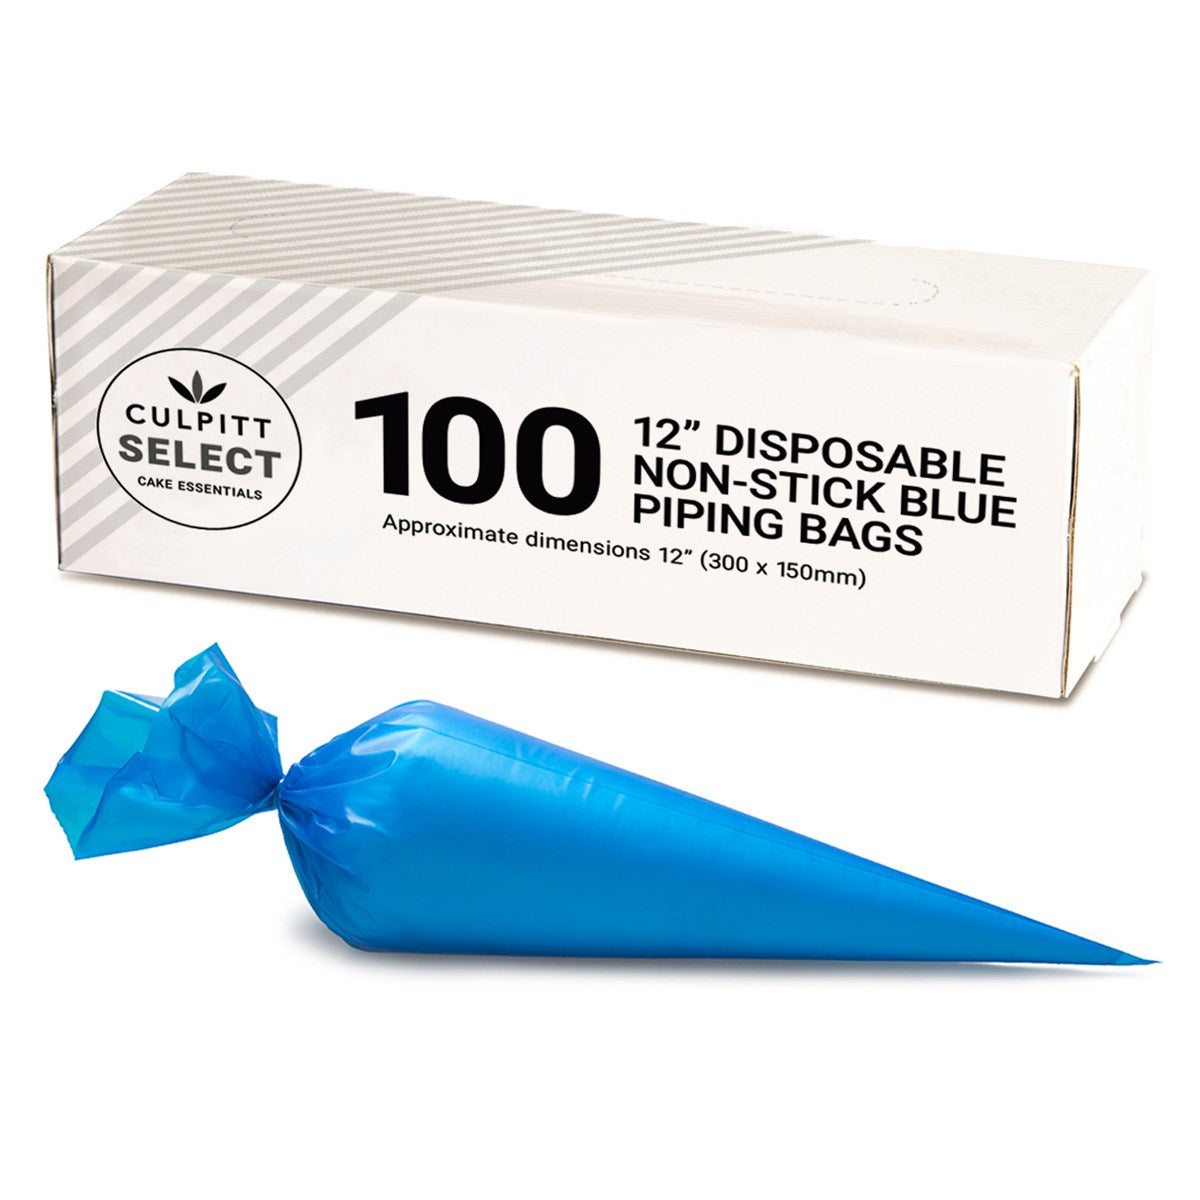 12" Disposable Piping Bags - Pack of 100